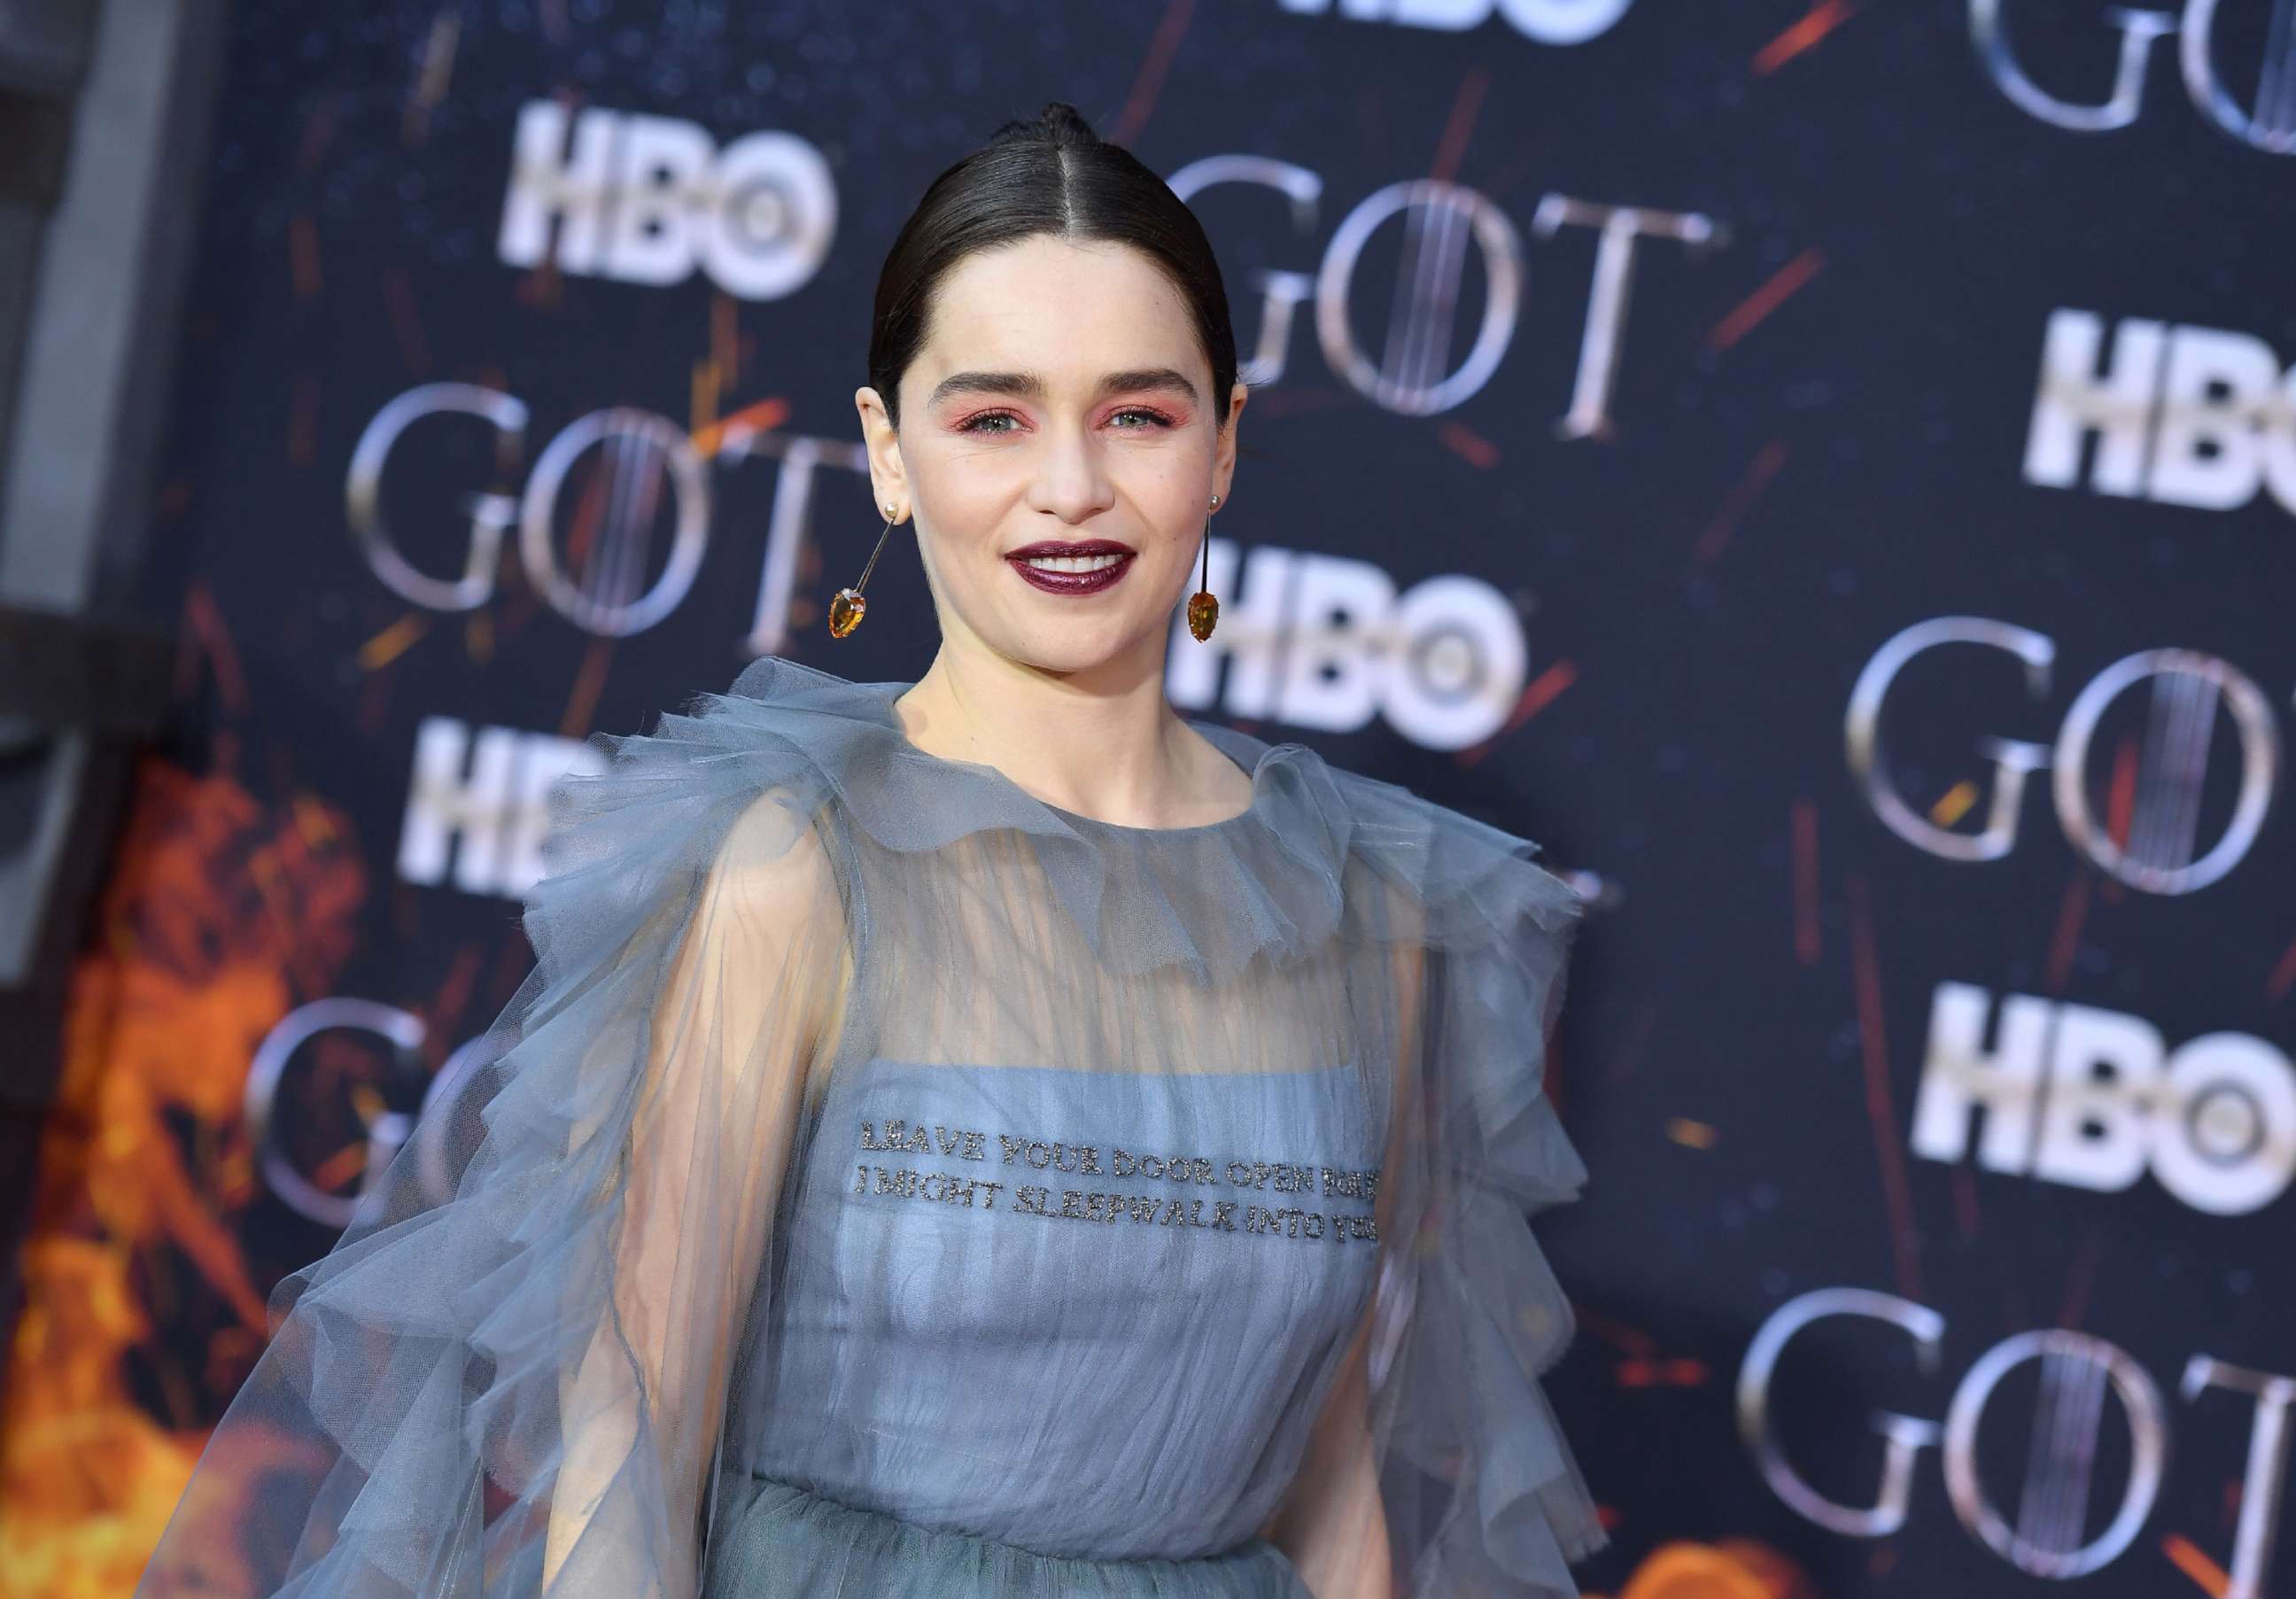 PHOTO: British actress Emilia Clarke arrives for the "Game of Thrones" eighth and final season premiere at Radio City Music Hall in New York, April 3, 2019.